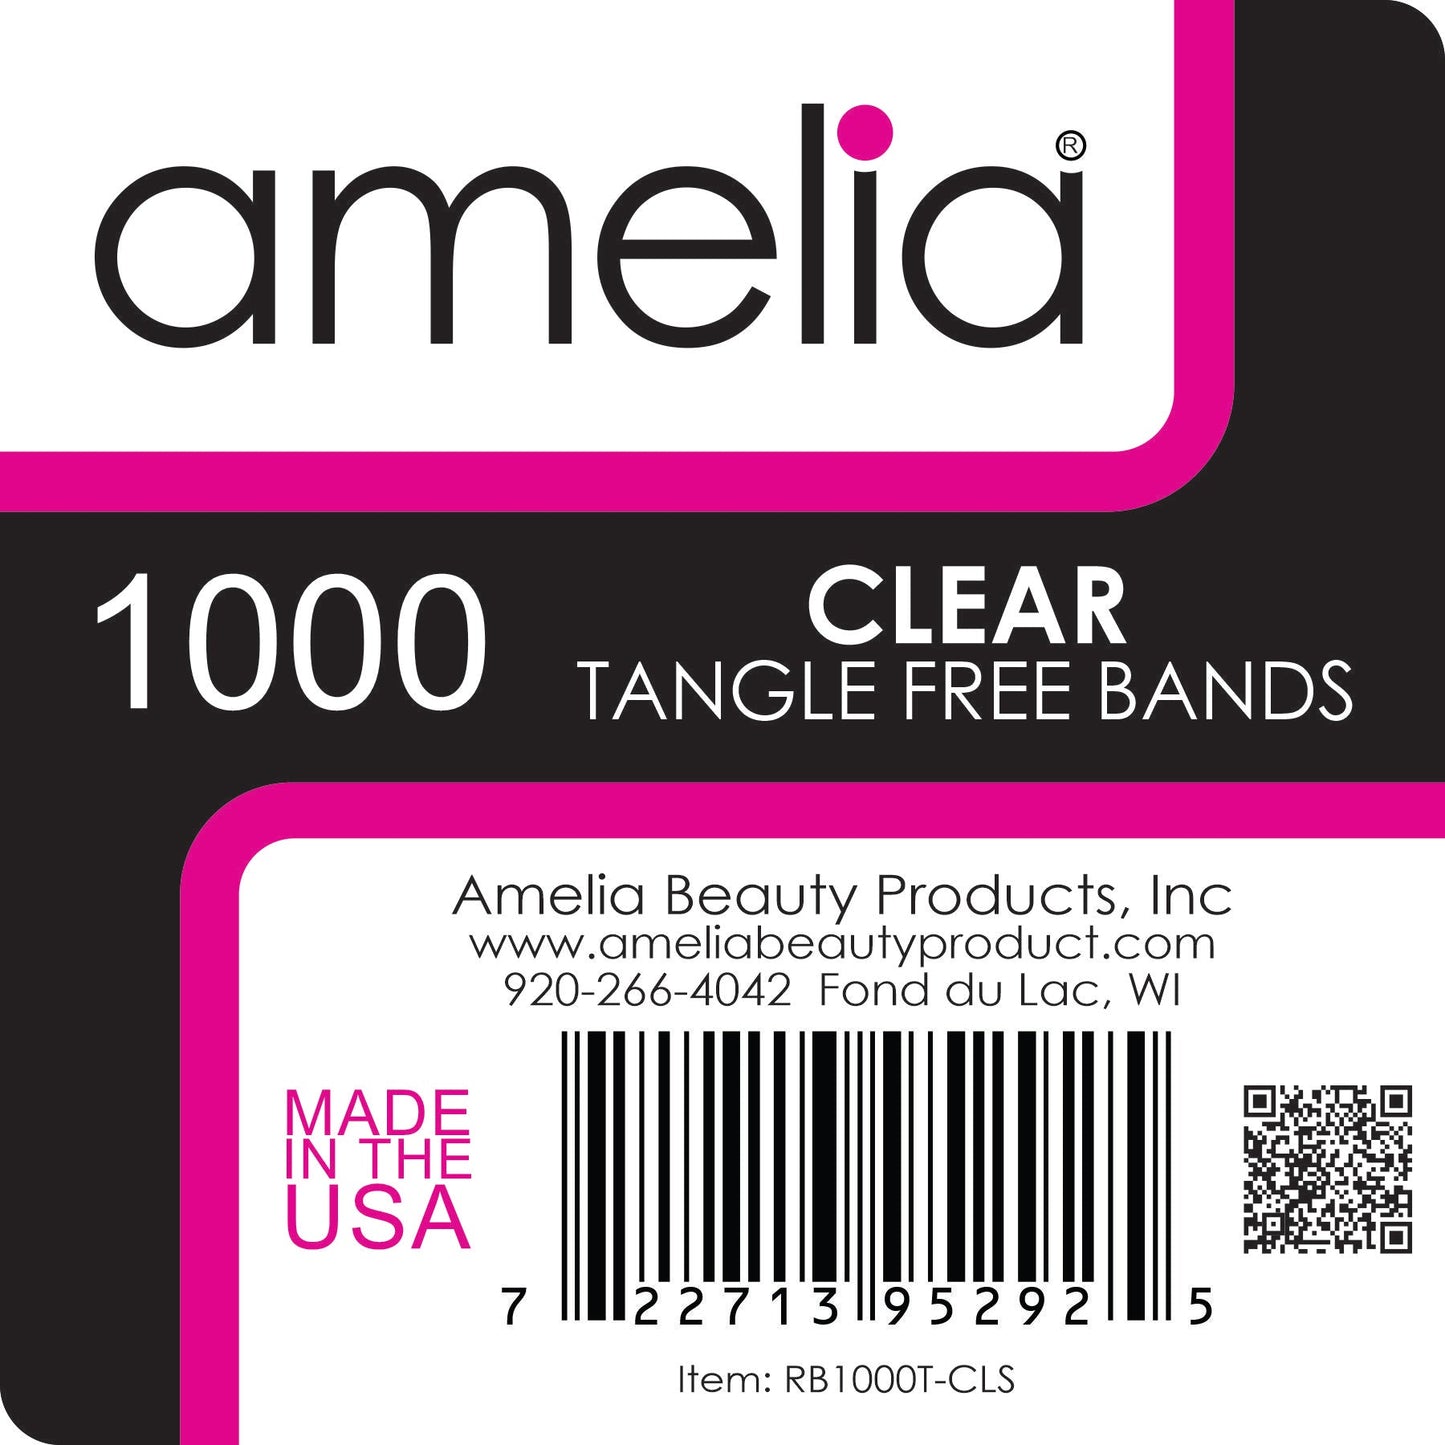 Amelia Beauty | 1/2in, Clear, Tangle Free Elastic Pony Tail Holders | Made in USA, Ideal for Ponytails, Braids, Twists. For Women, Girls. Pain Free, Snag Free, Easy Off | 1000 Pack - 12 Retail Packs